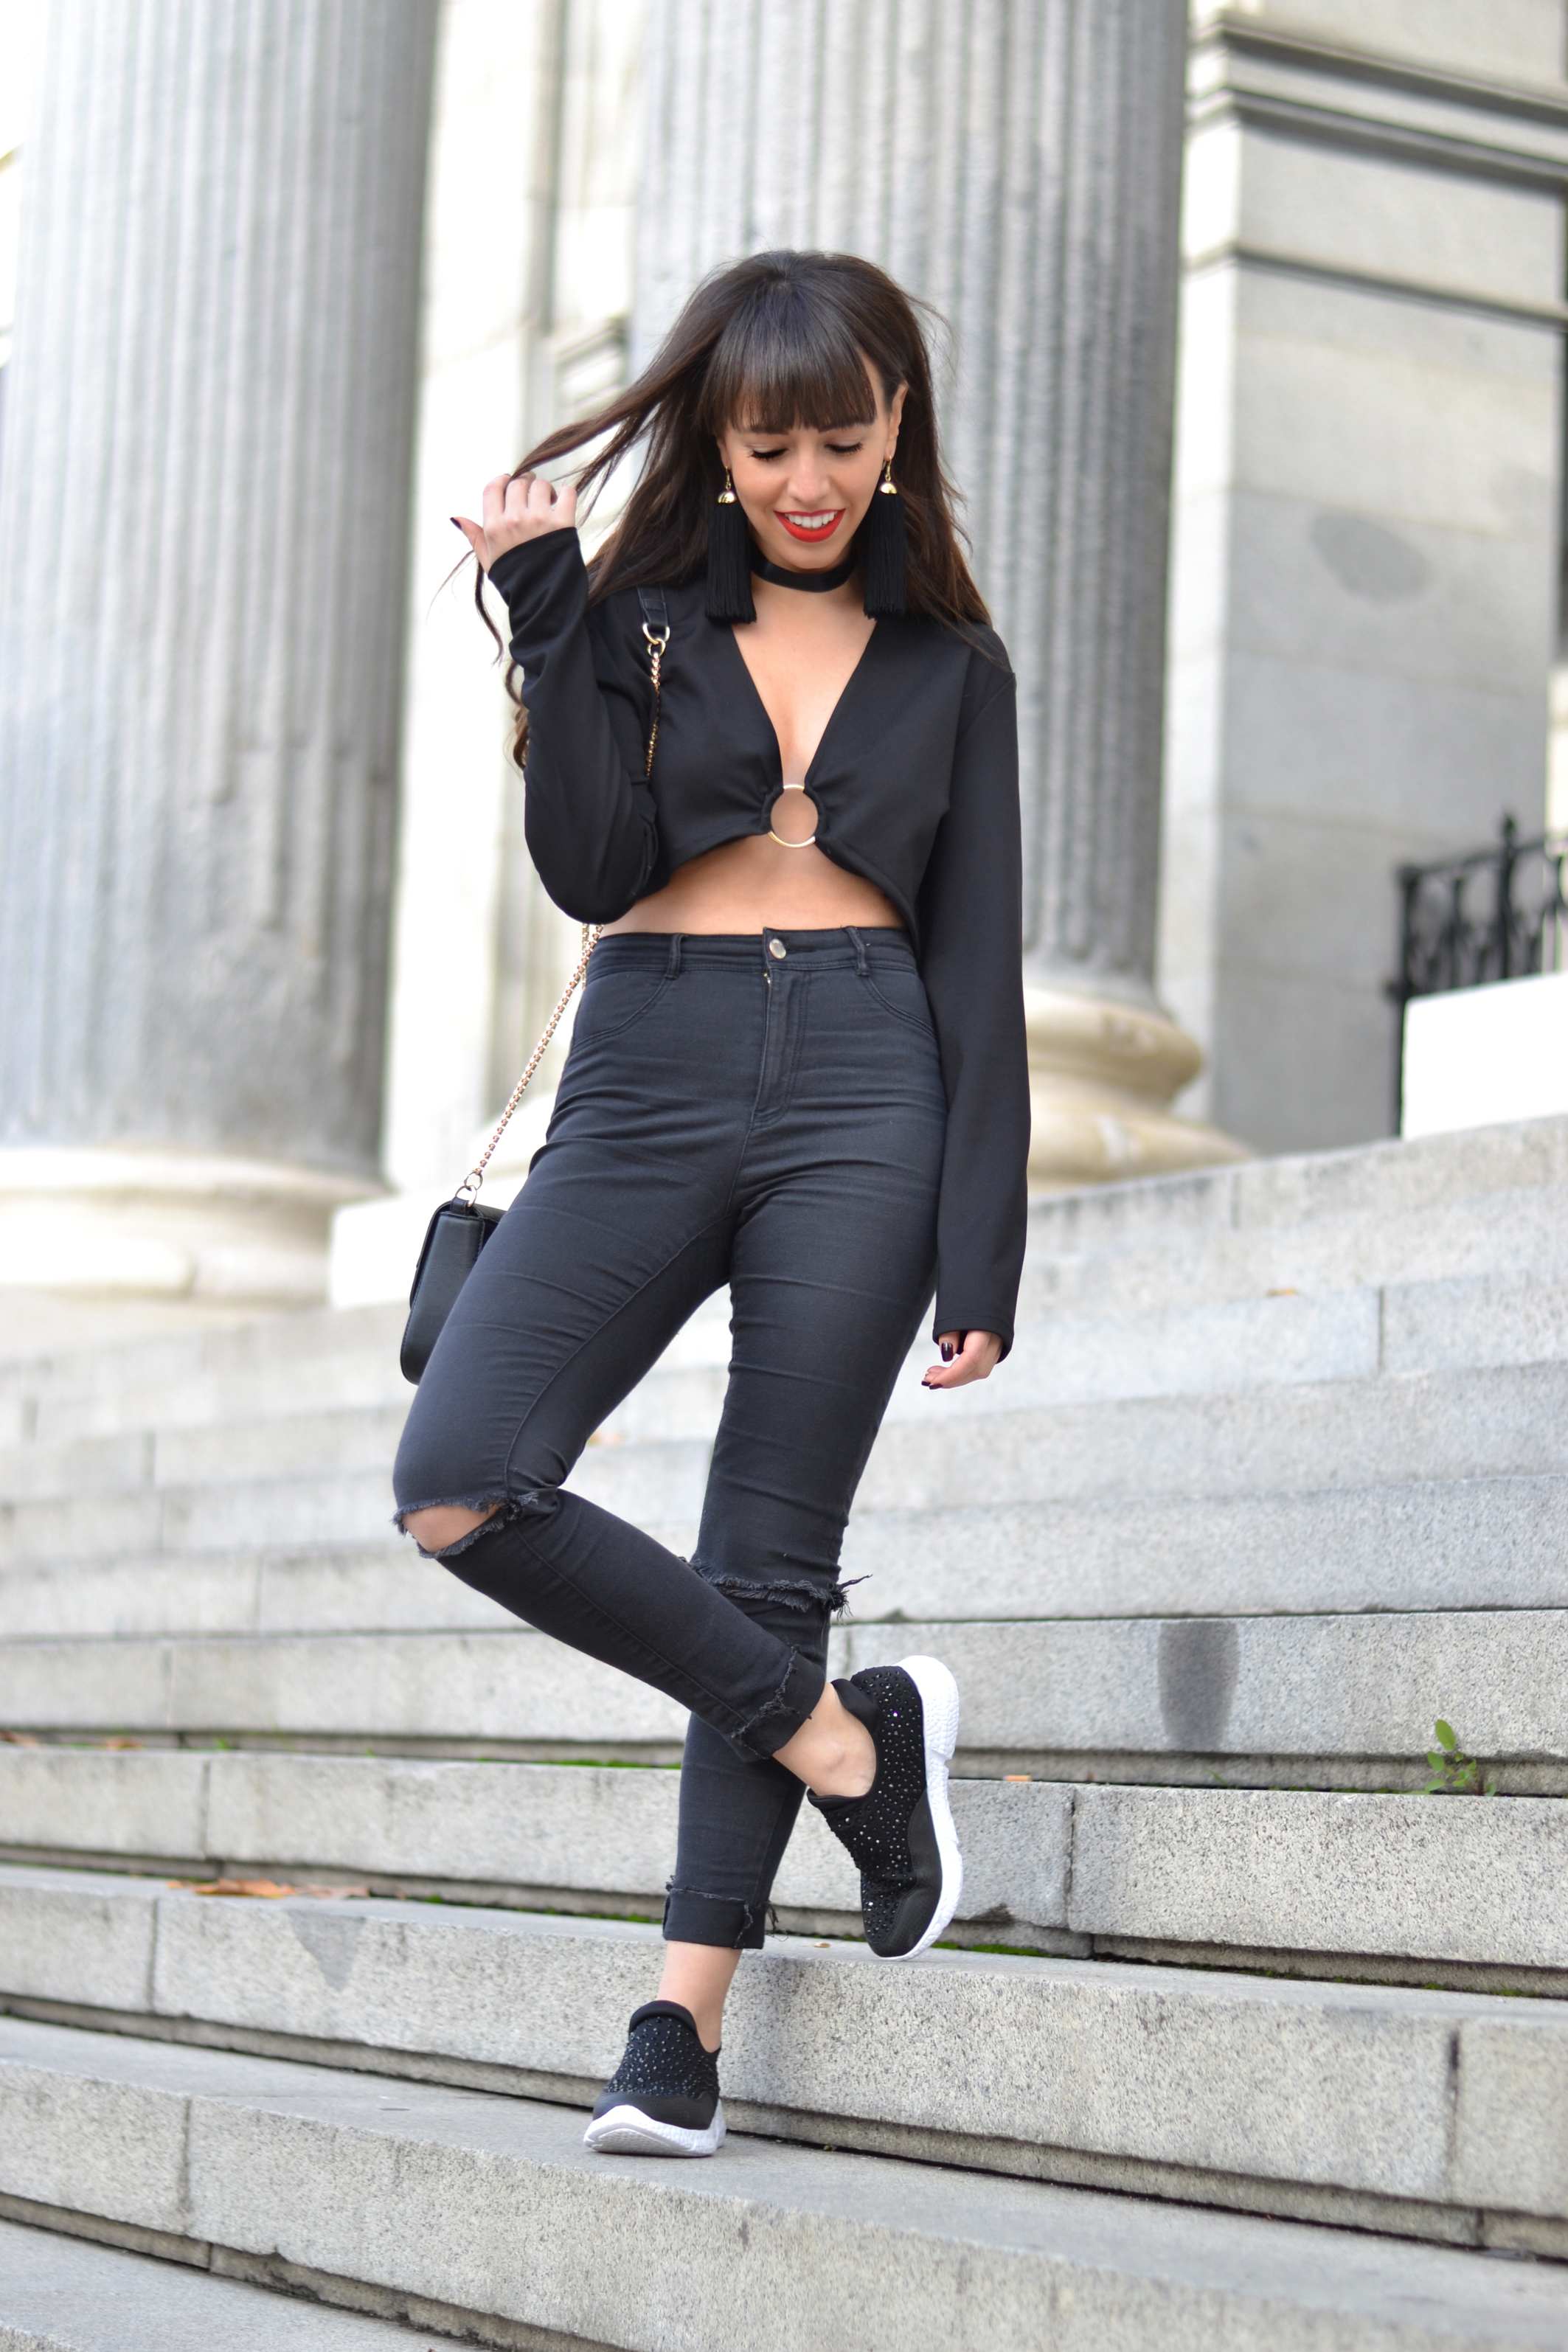 Street style, casual outfit, black crop top outfit ideas, jeweled sneakers